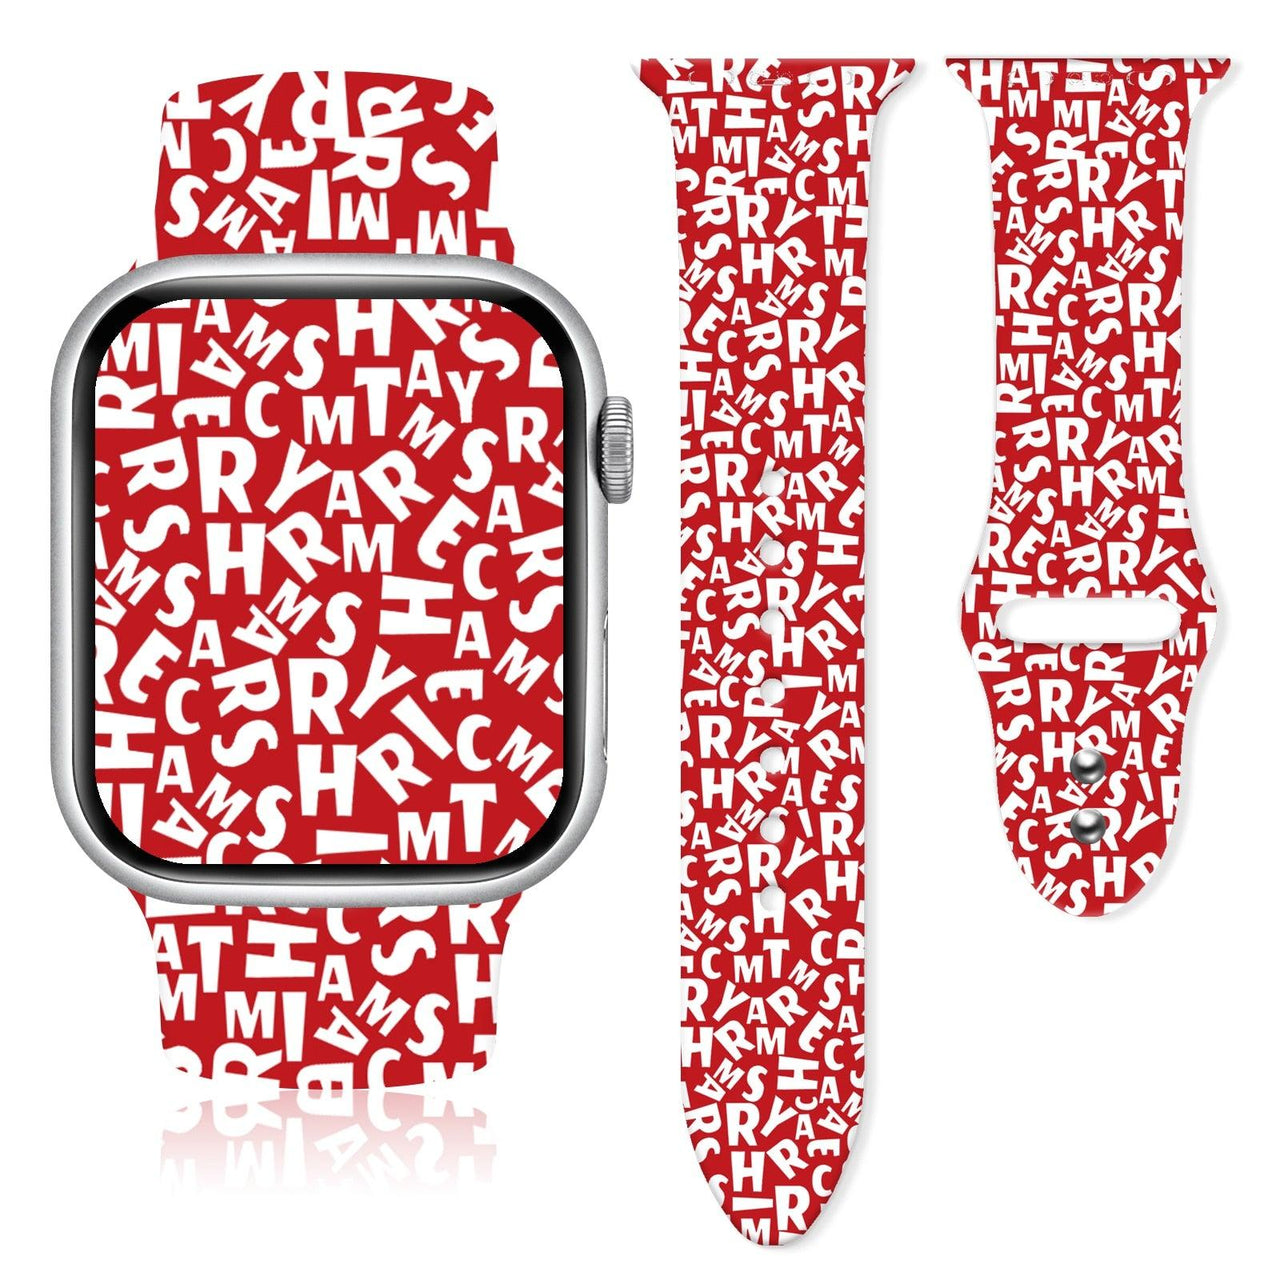 Christmas Patterns Printed Silicone Apple Watch Band - watchband.direct